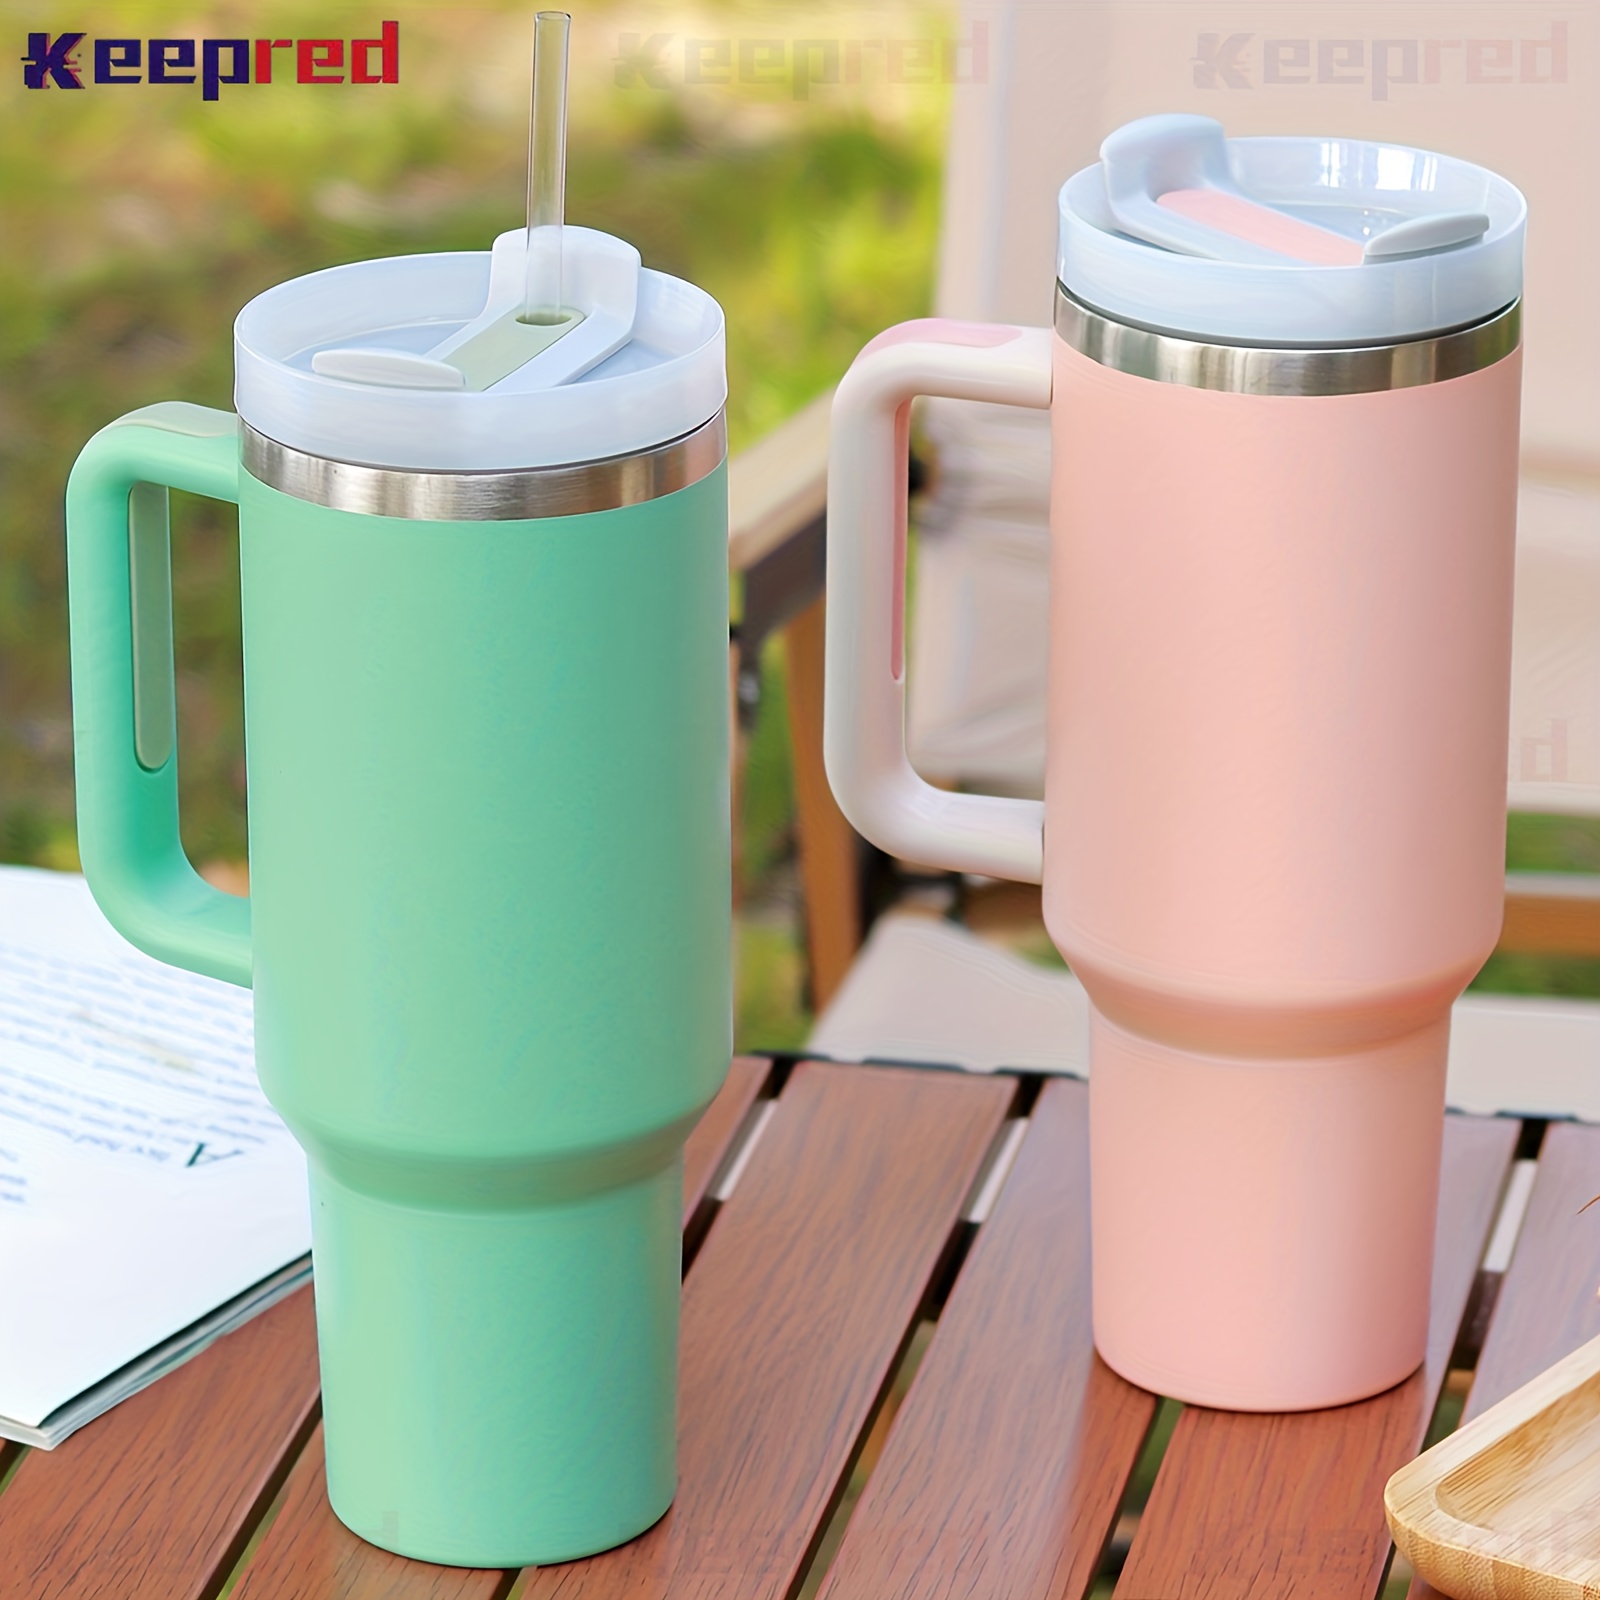 https://img.kwcdn.com/product/keepred-v2-stainless-steel-leakproof-tumbler-insulation-cup/d69d2f15w98k18-bd190f59/Fancyalgo/VirtualModelMatting/d332d4629699d7d518e7ccc5bef8dc86.jpg